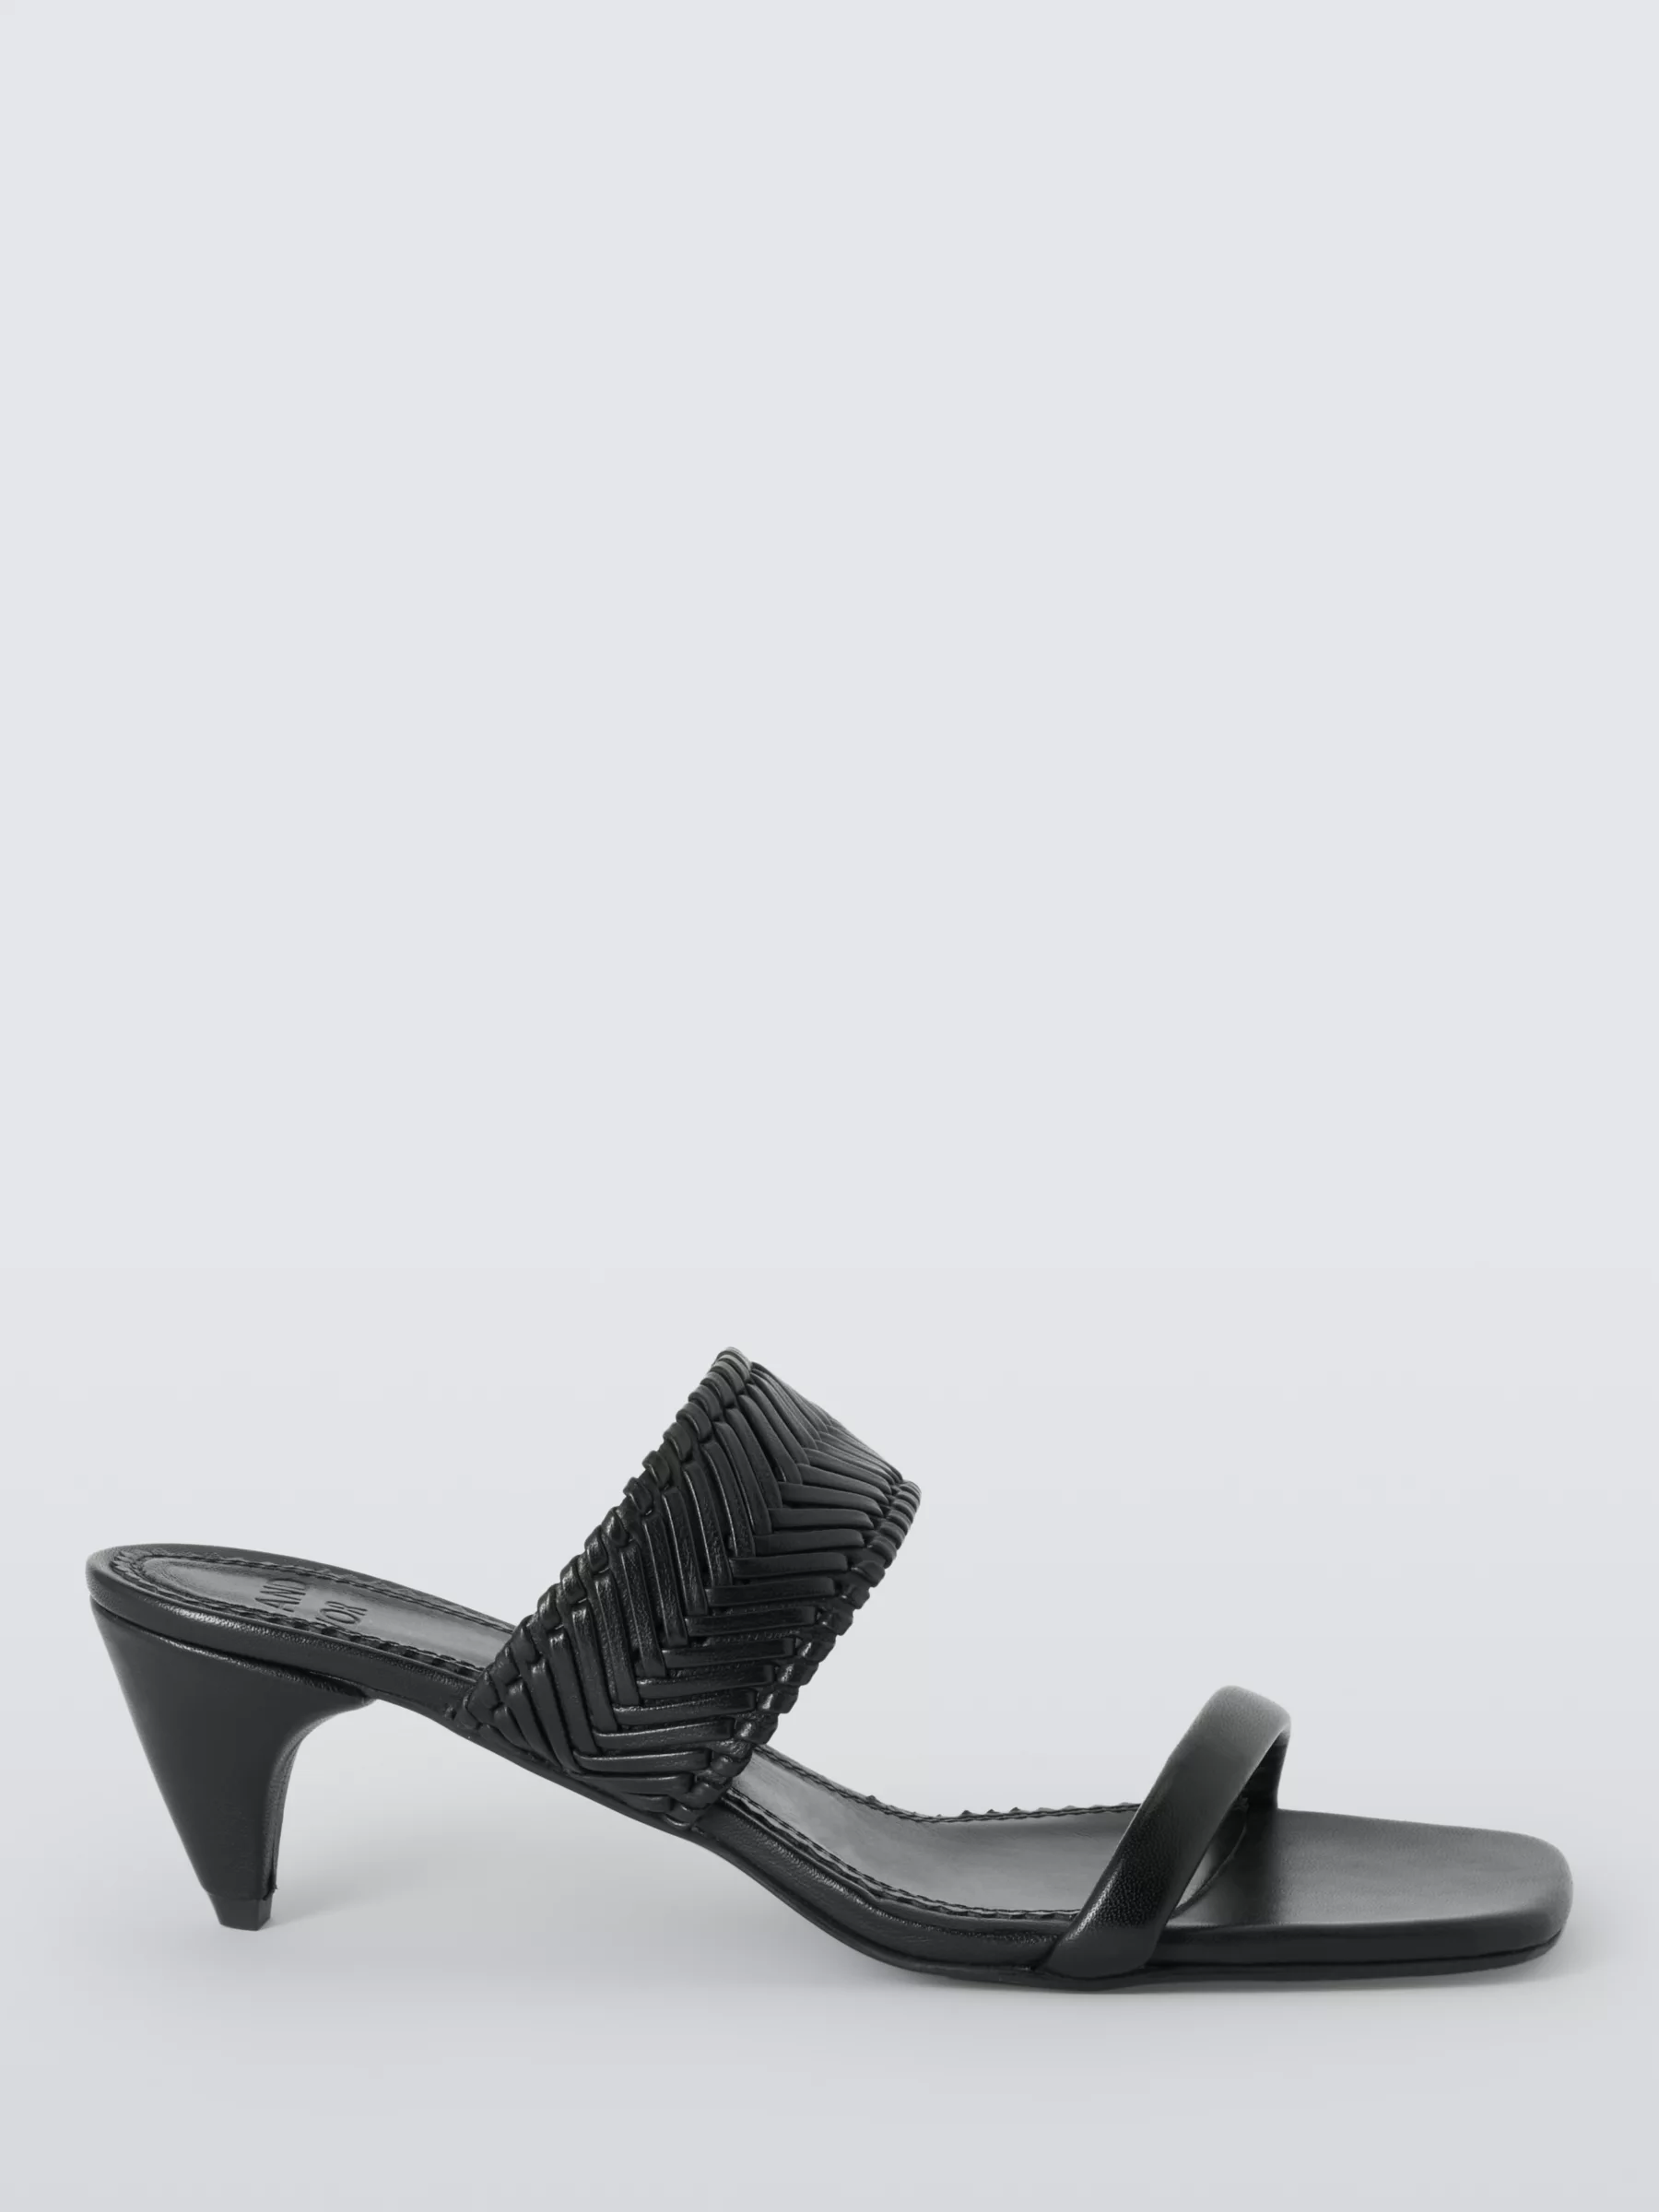 And/or Irealea Leather Feature Heel Woven Mule Sandals